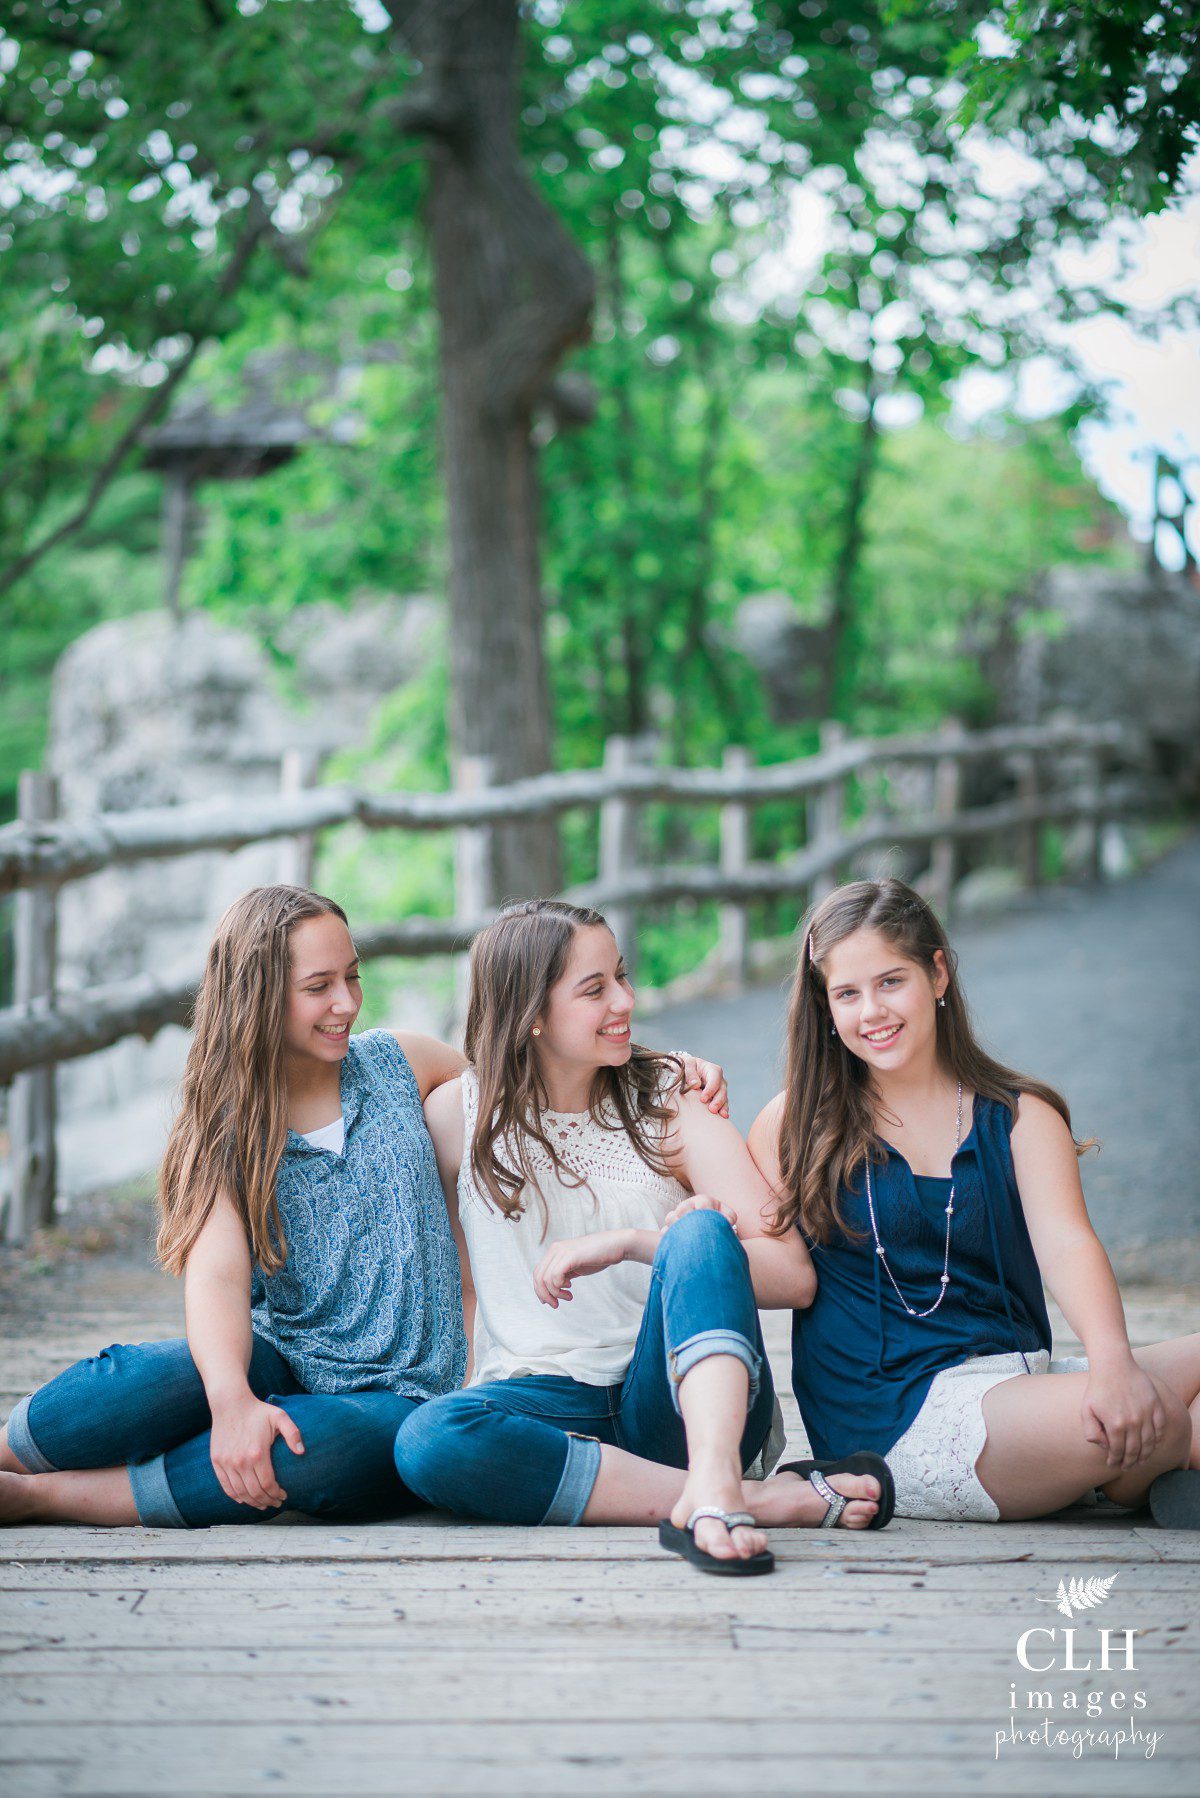 CLH images Photography - Mohonk Moutain House - Family Photography - Sisters (3)